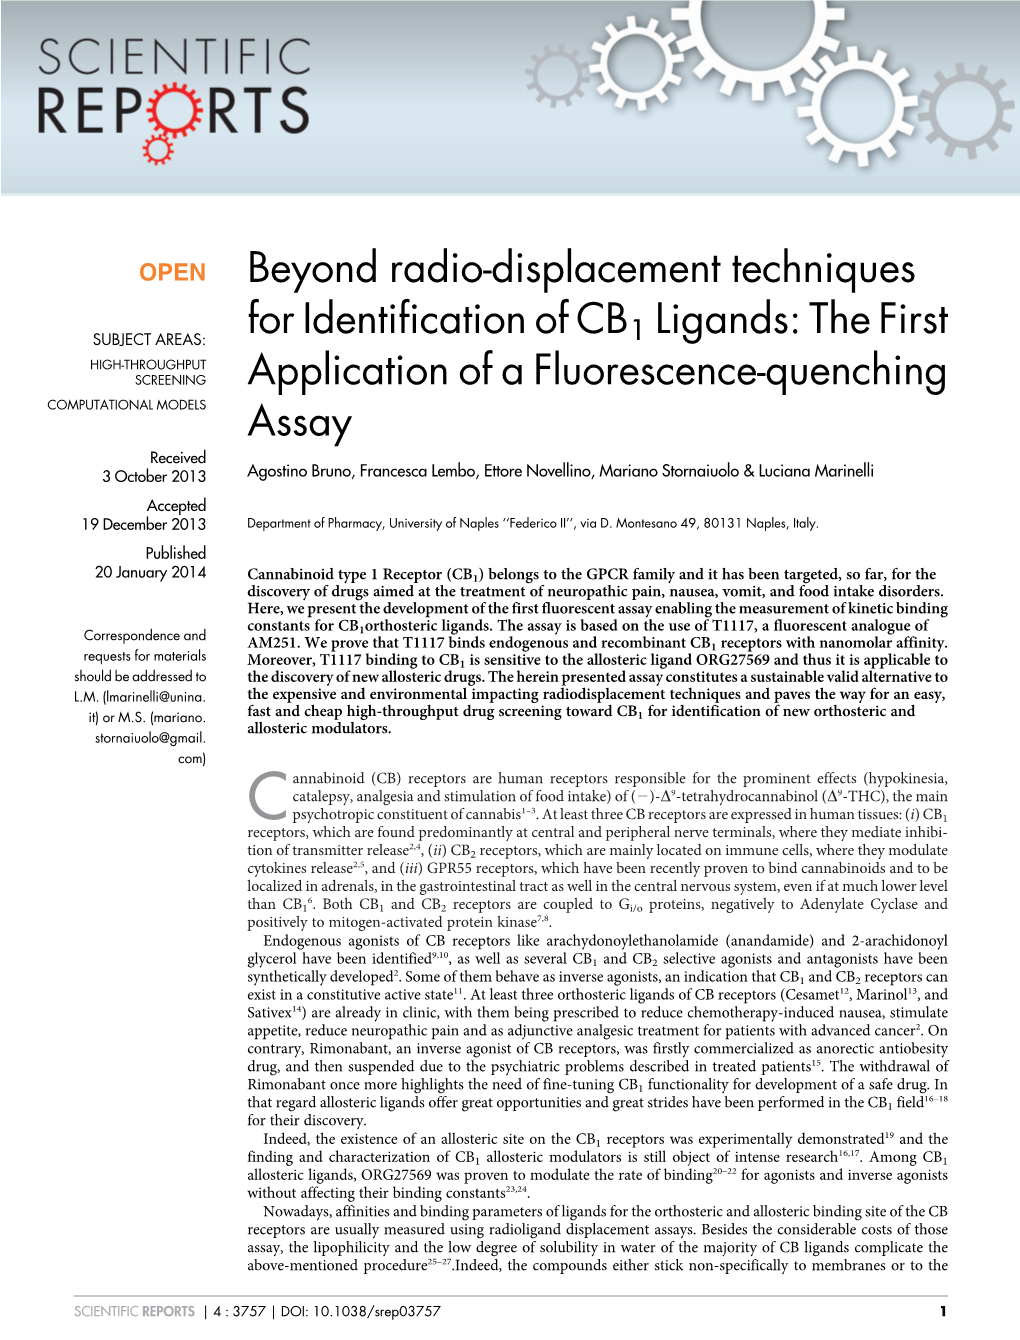 The First Application of a Fluorescence-Quenching Assay